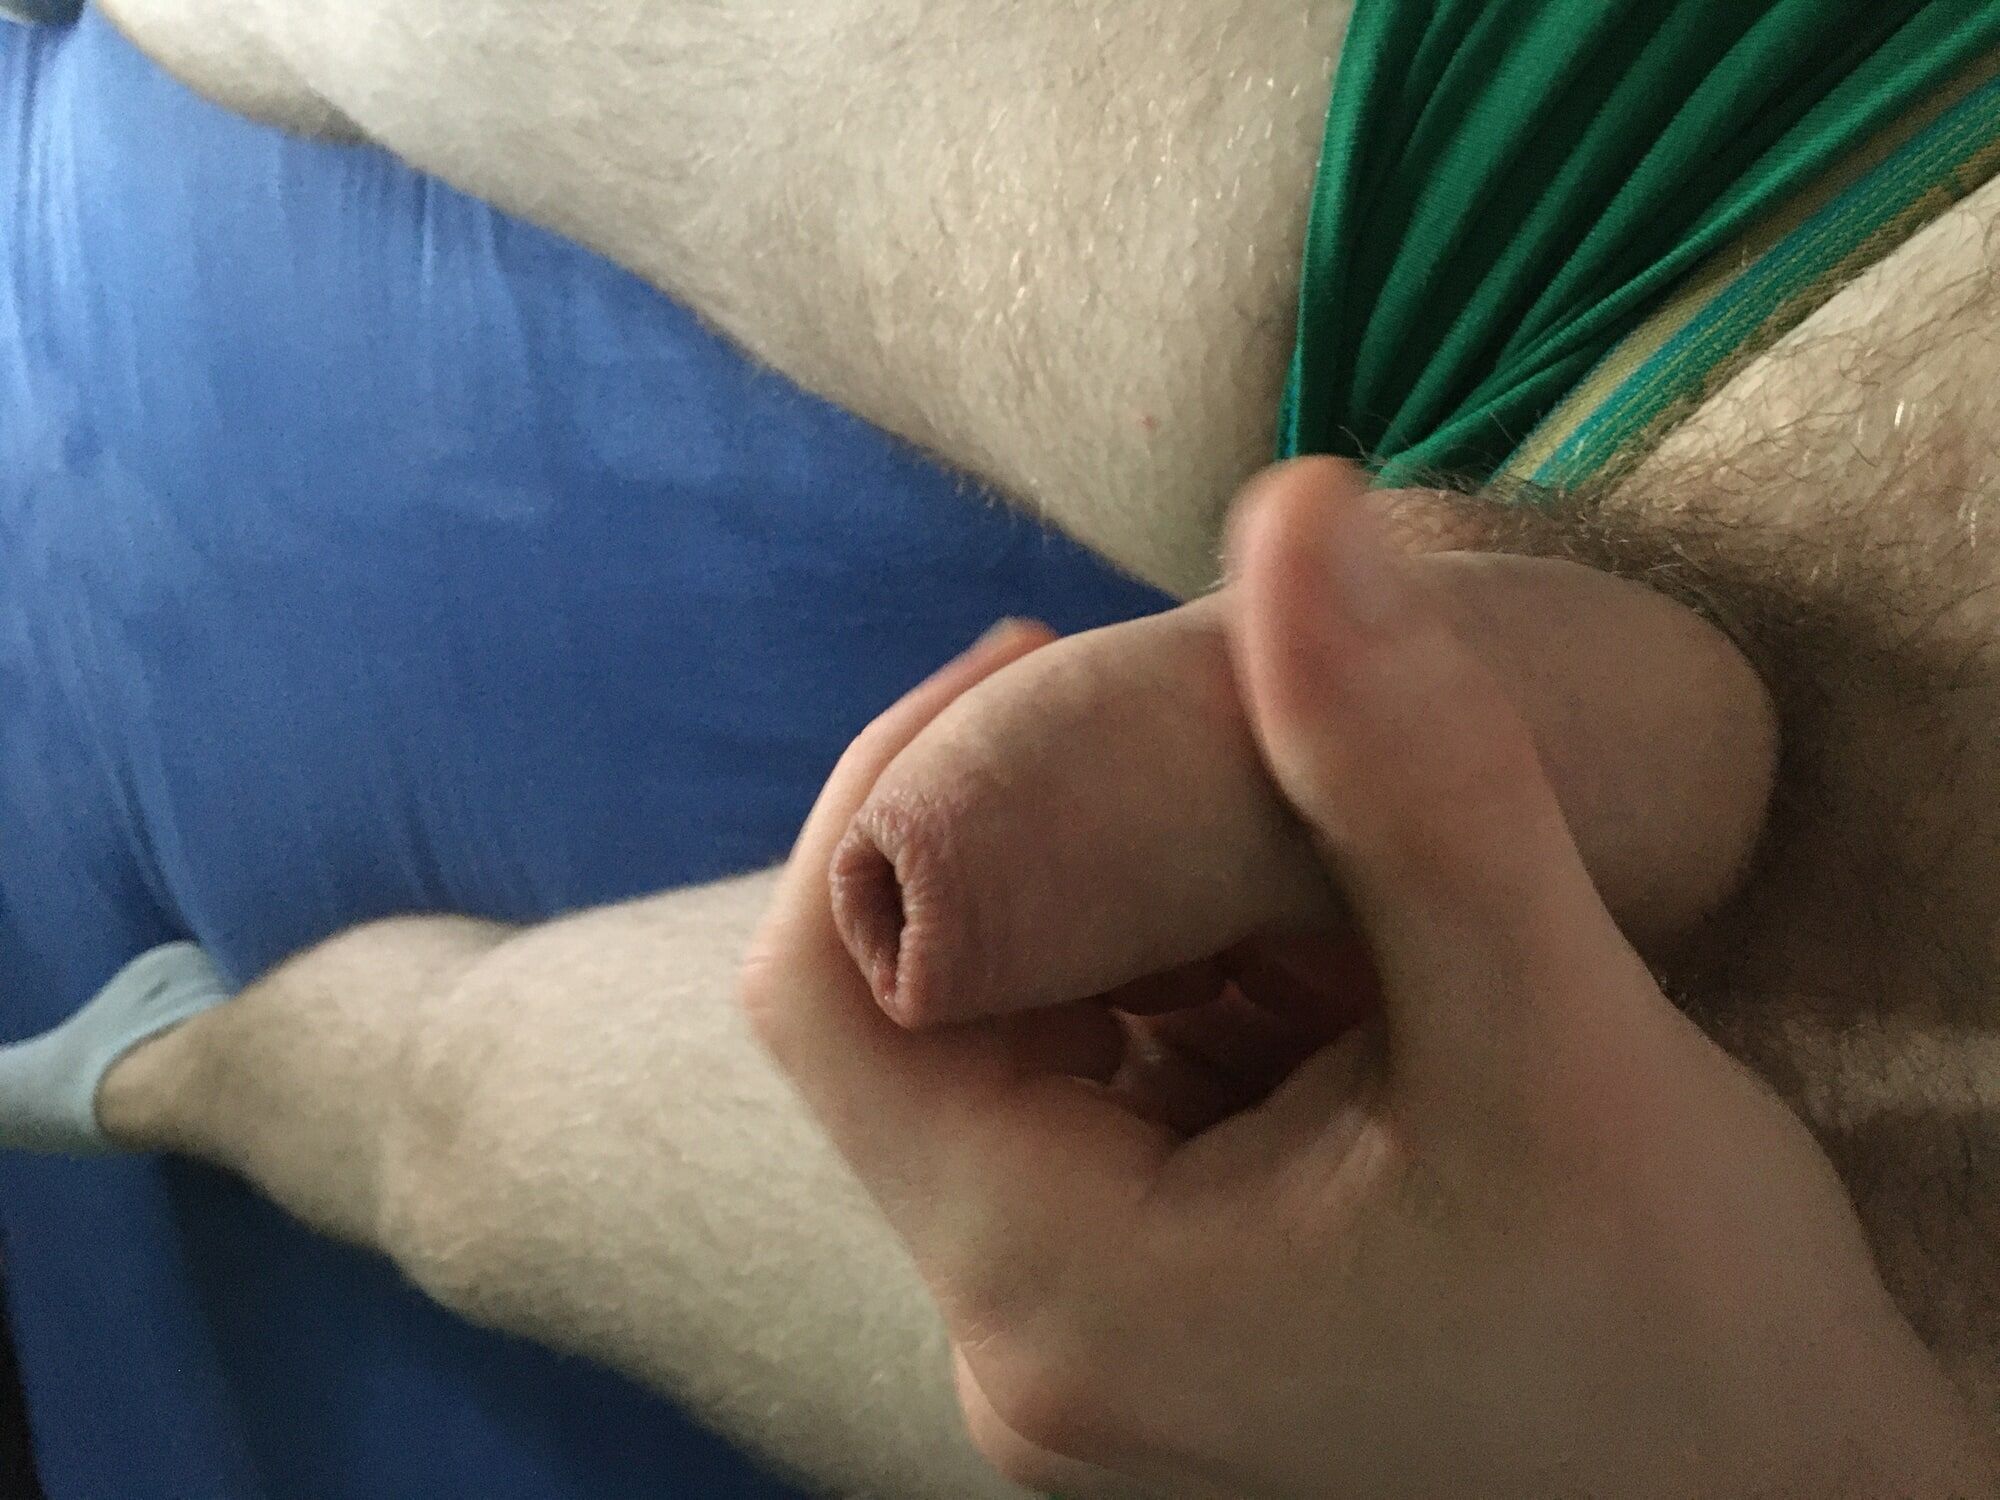 Hairy Dick And Balls Cockhead Foreskin Play With Pre- Cum #26